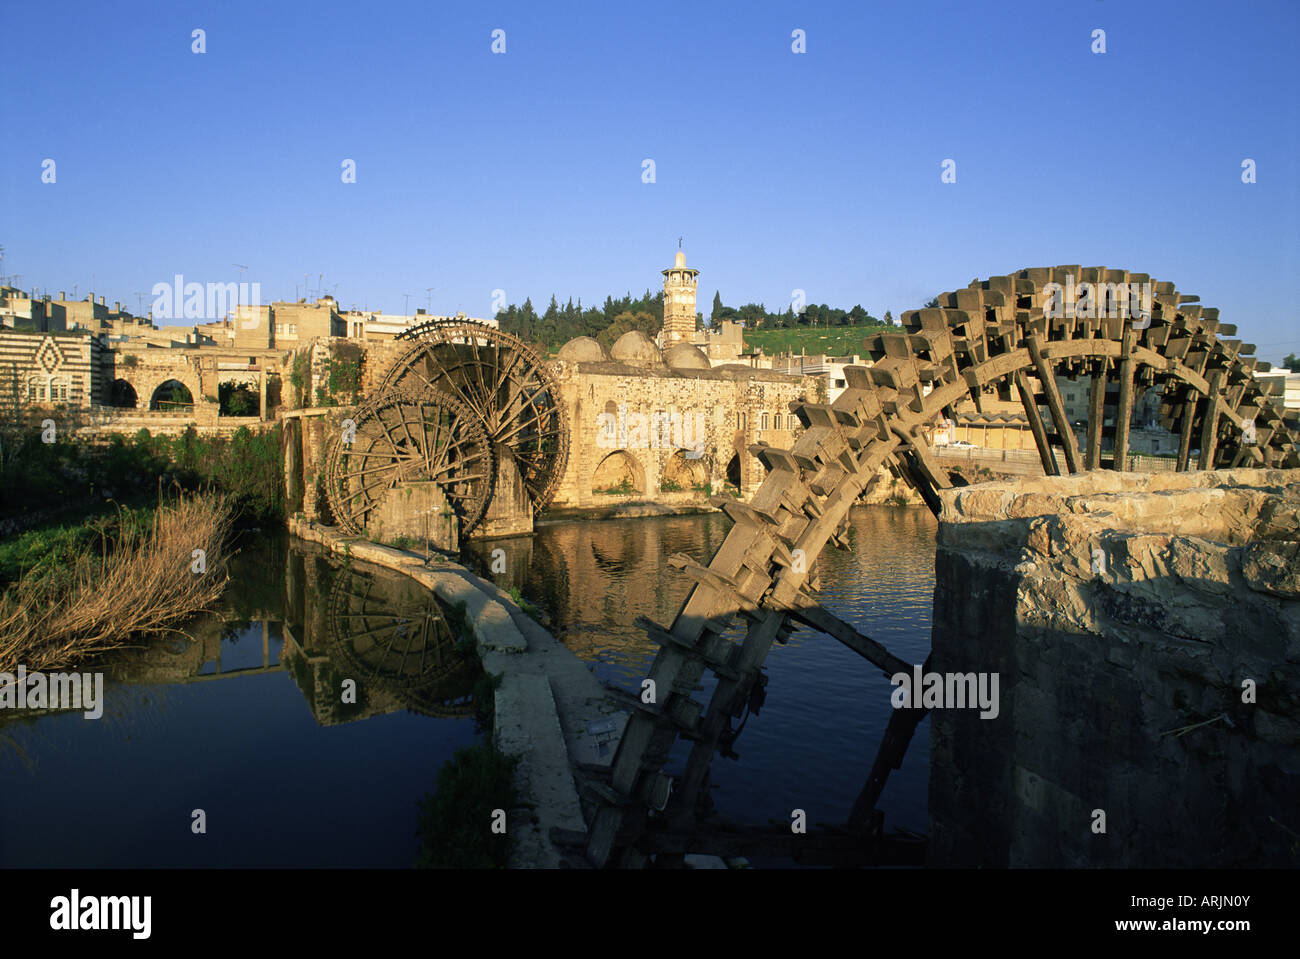 Al Jaabariys, norias (nourias) (water wheels), and the Al Nour Mosque, on the Orontes River, Hama, Syria, Middle East Stock Photo